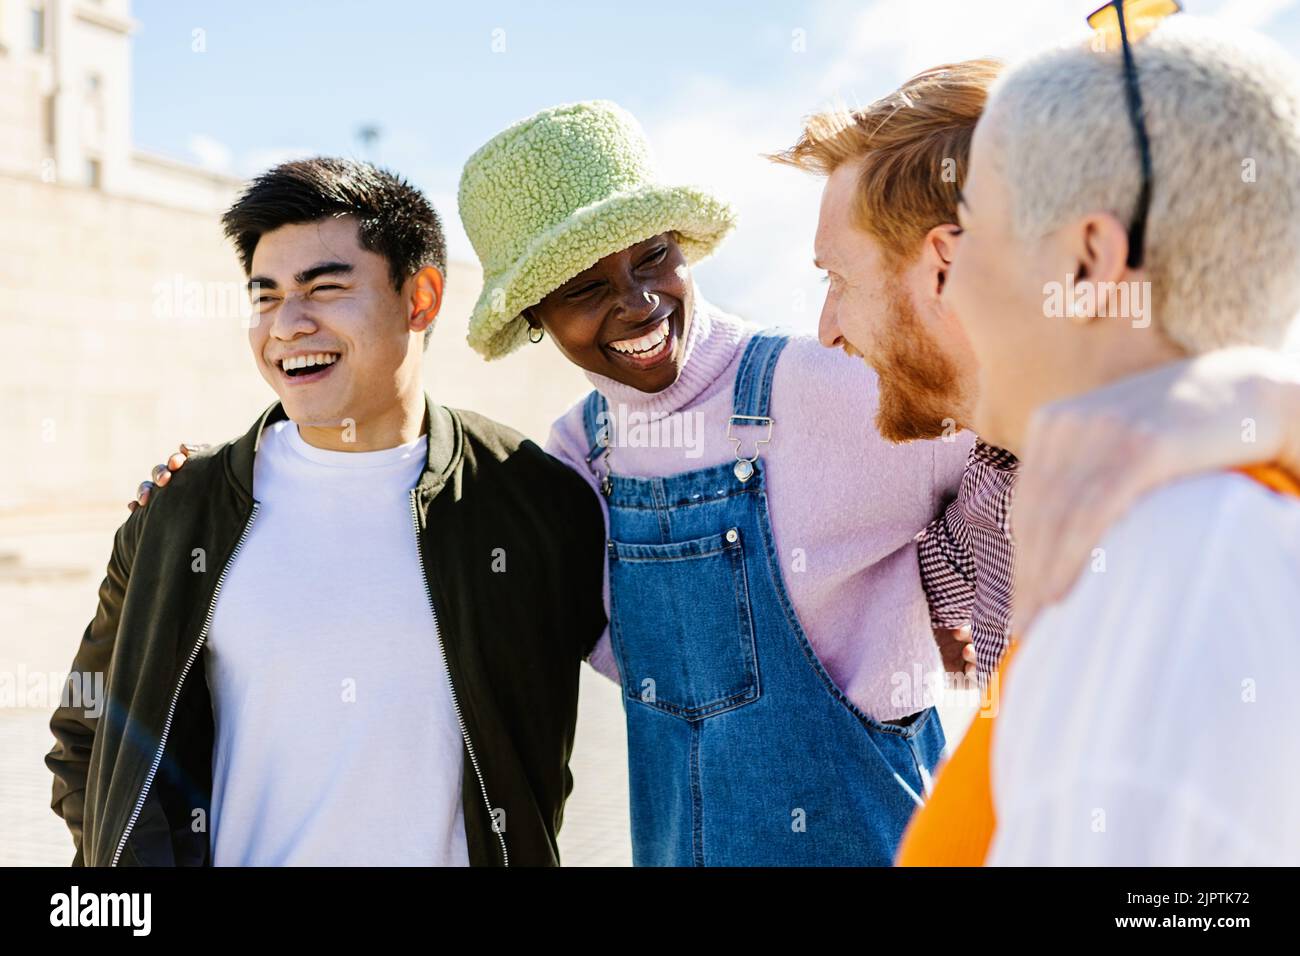 Happy multi ethnic group of young friends having fun together outdoors Stock Photo